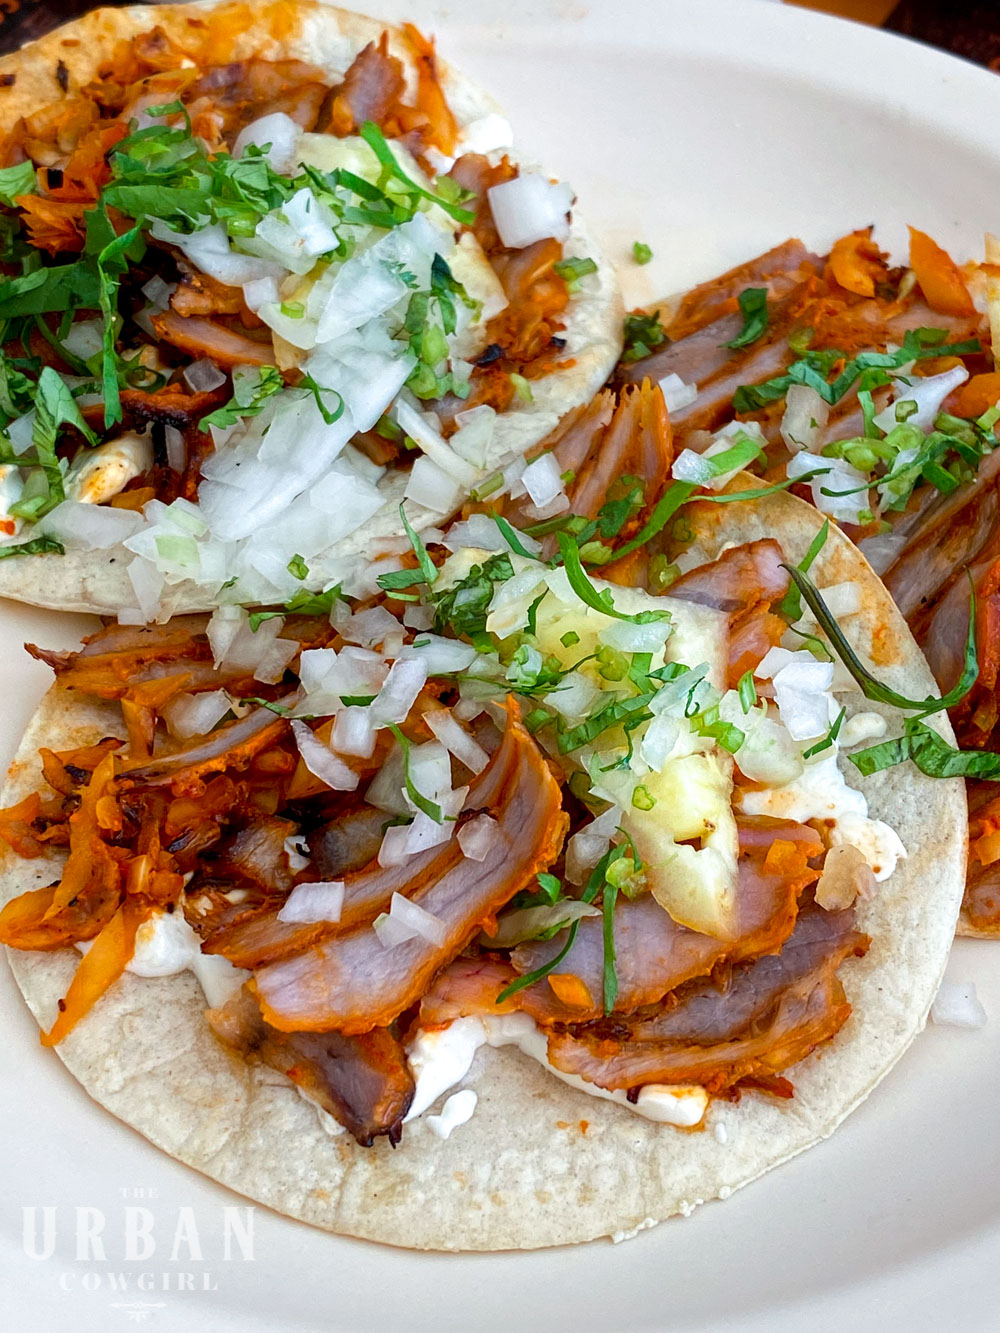 Tacos Al Pastor topped corn tortillas with veggies and pineapple at El Fogon.